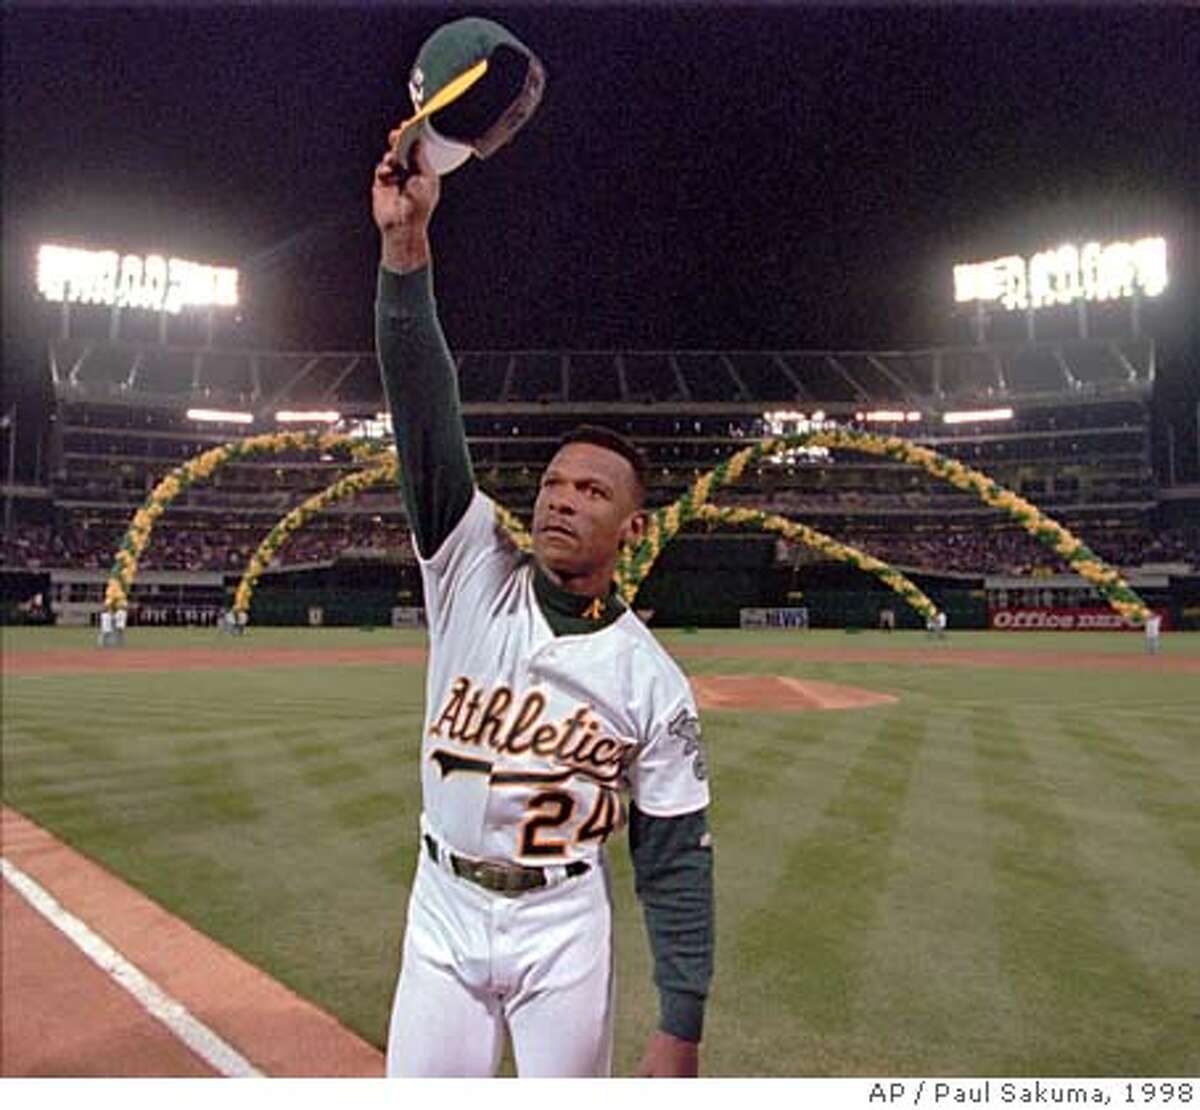 Oakland Athletics left fielder Rickey Henderson waves to the crowd as he is introduced before the game against the Boston Red Sox, Wednesday night, April 1, 1998, at the Oakland (Calif.) Coliseum. (AP Photo/Paul Sakuma)